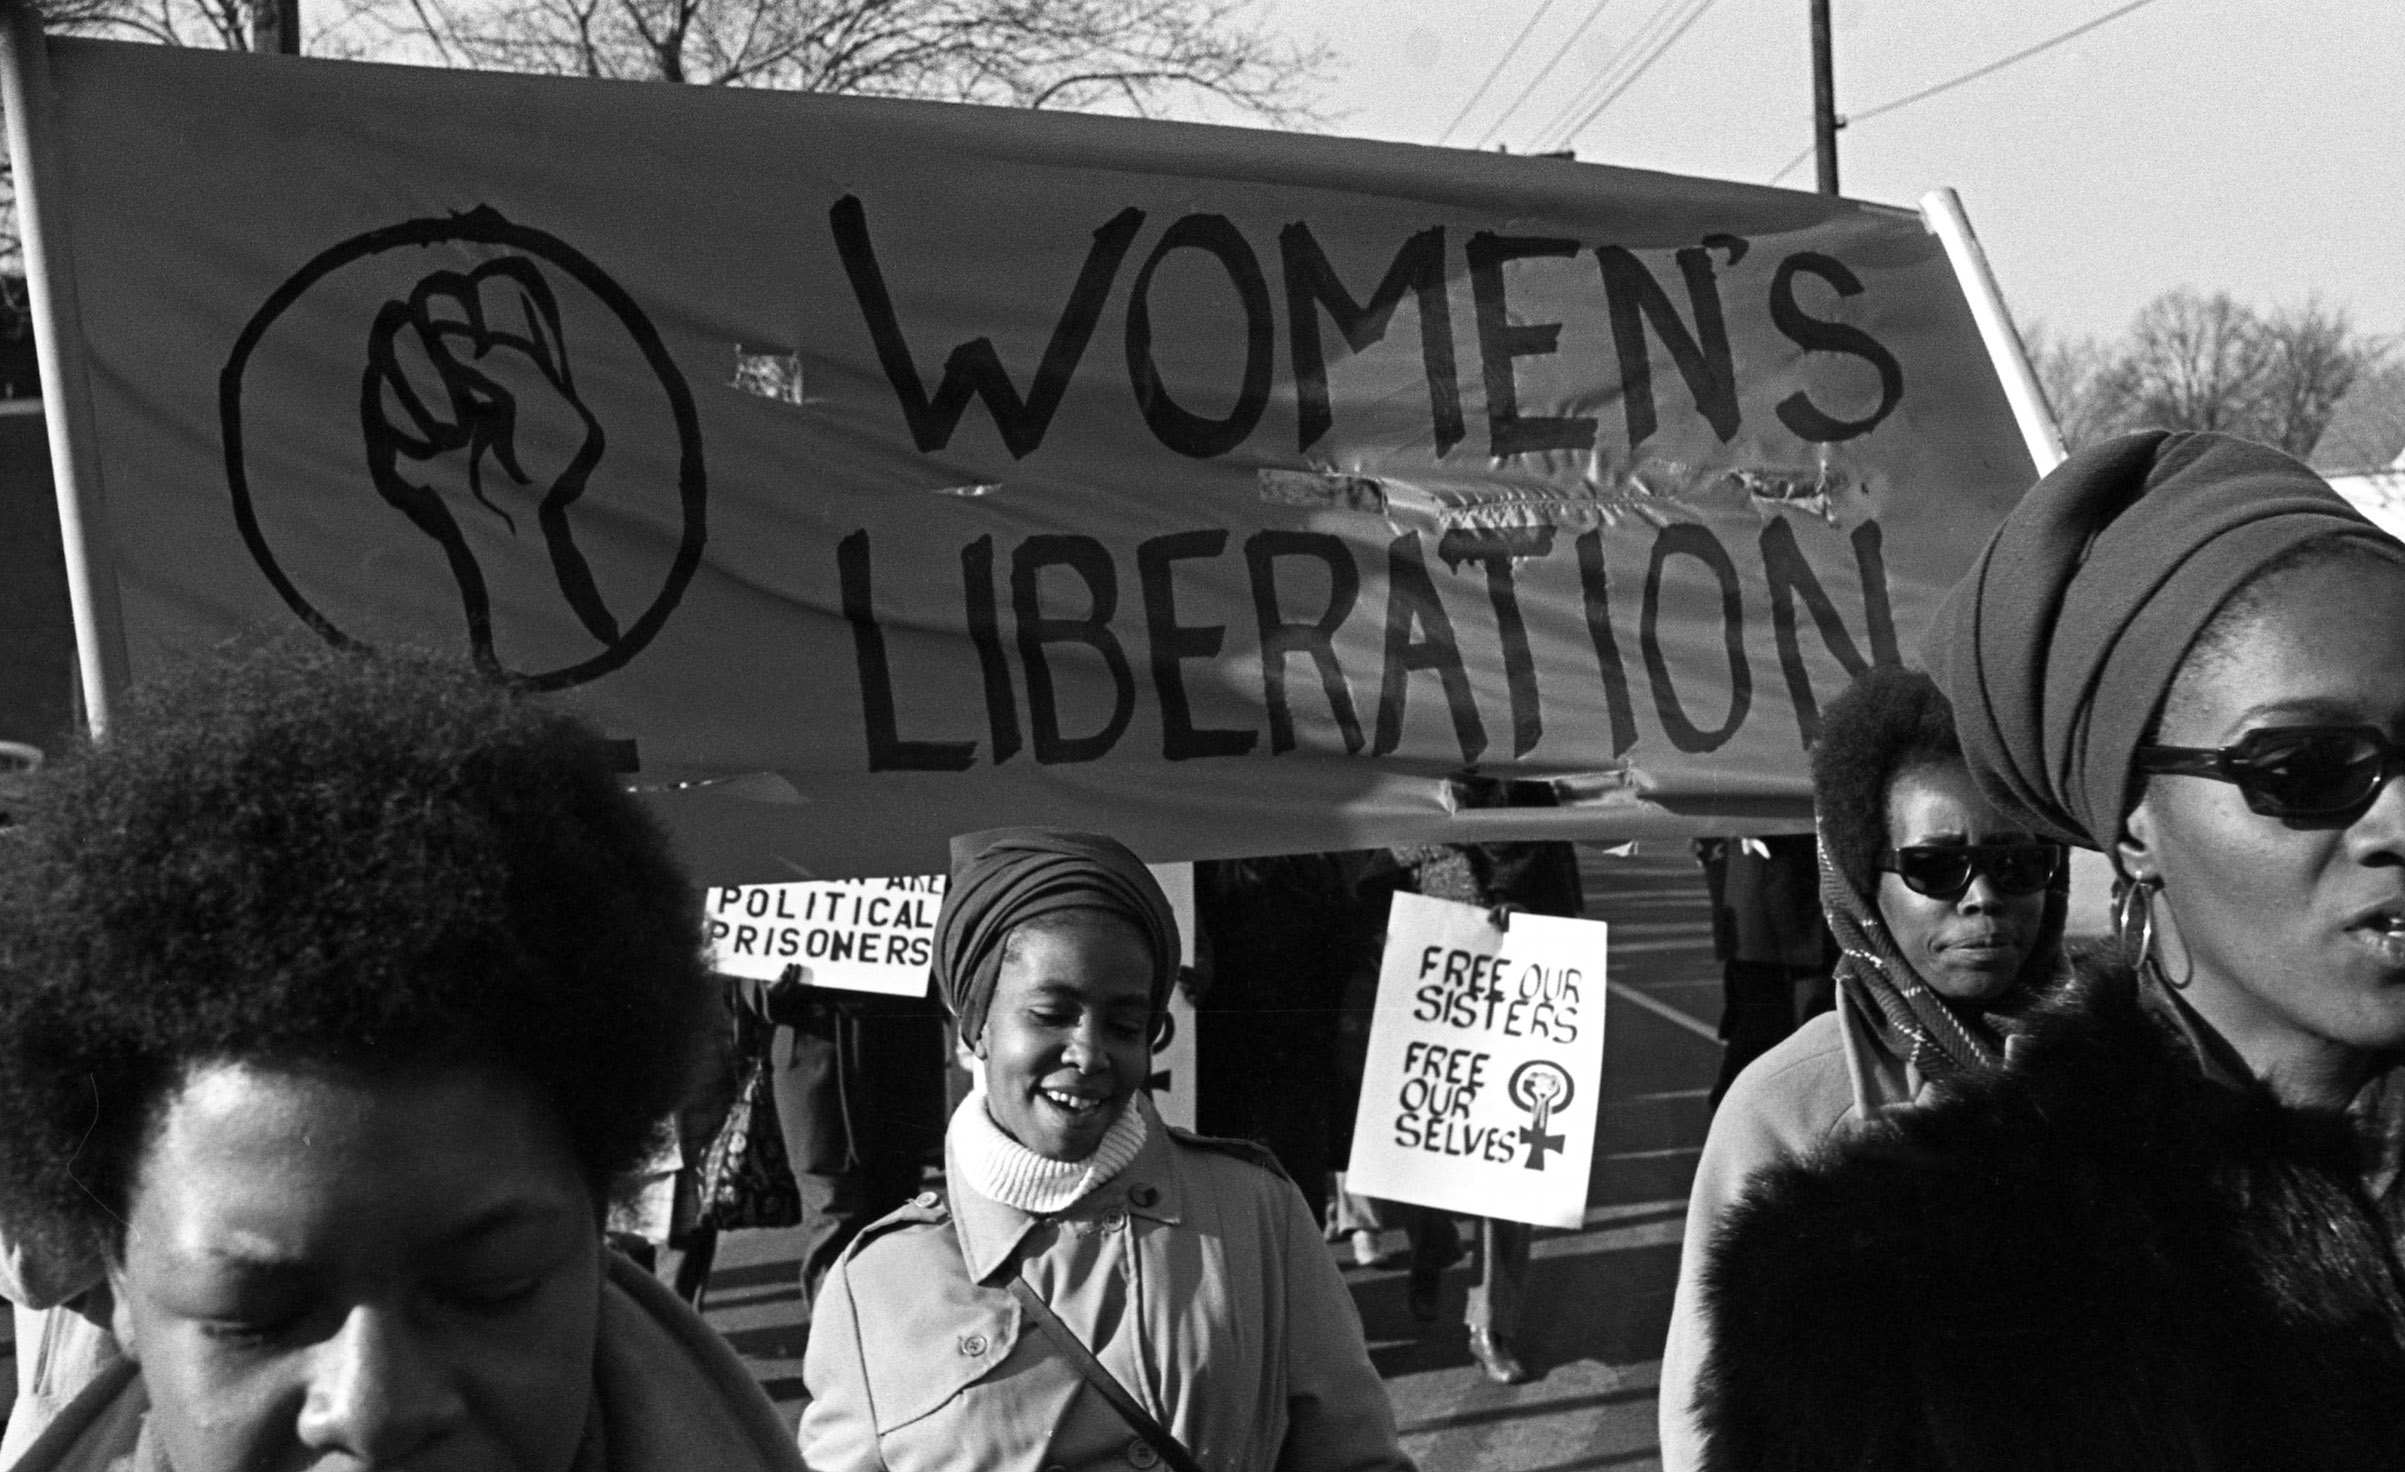 A group of women, under a 'Women's Liberation' banner, march in support of the Black Panther Party, New Haven, Conn., November 1969 (David Fenton—Getty Images)